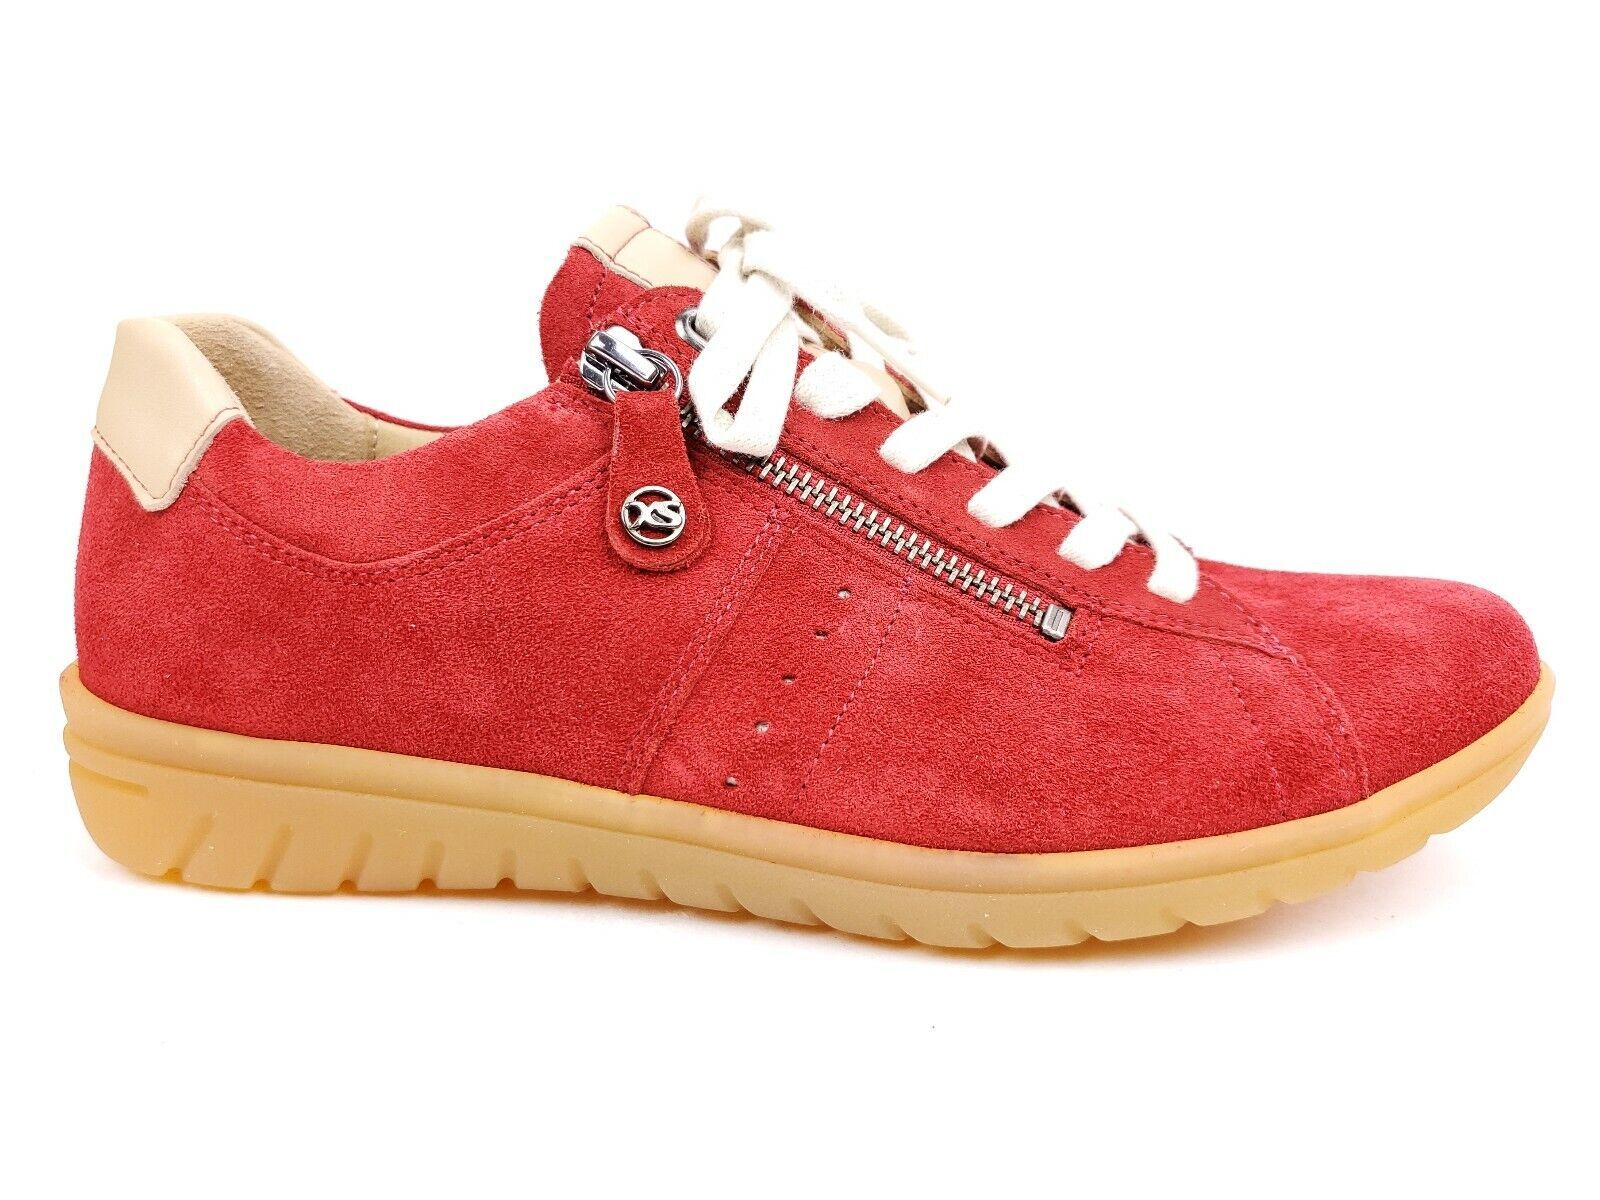 Primary image for Hartjes 88162 Women's Red Suede Velour Nappa XS Casual 2 Size UK 4 US 6-6.5